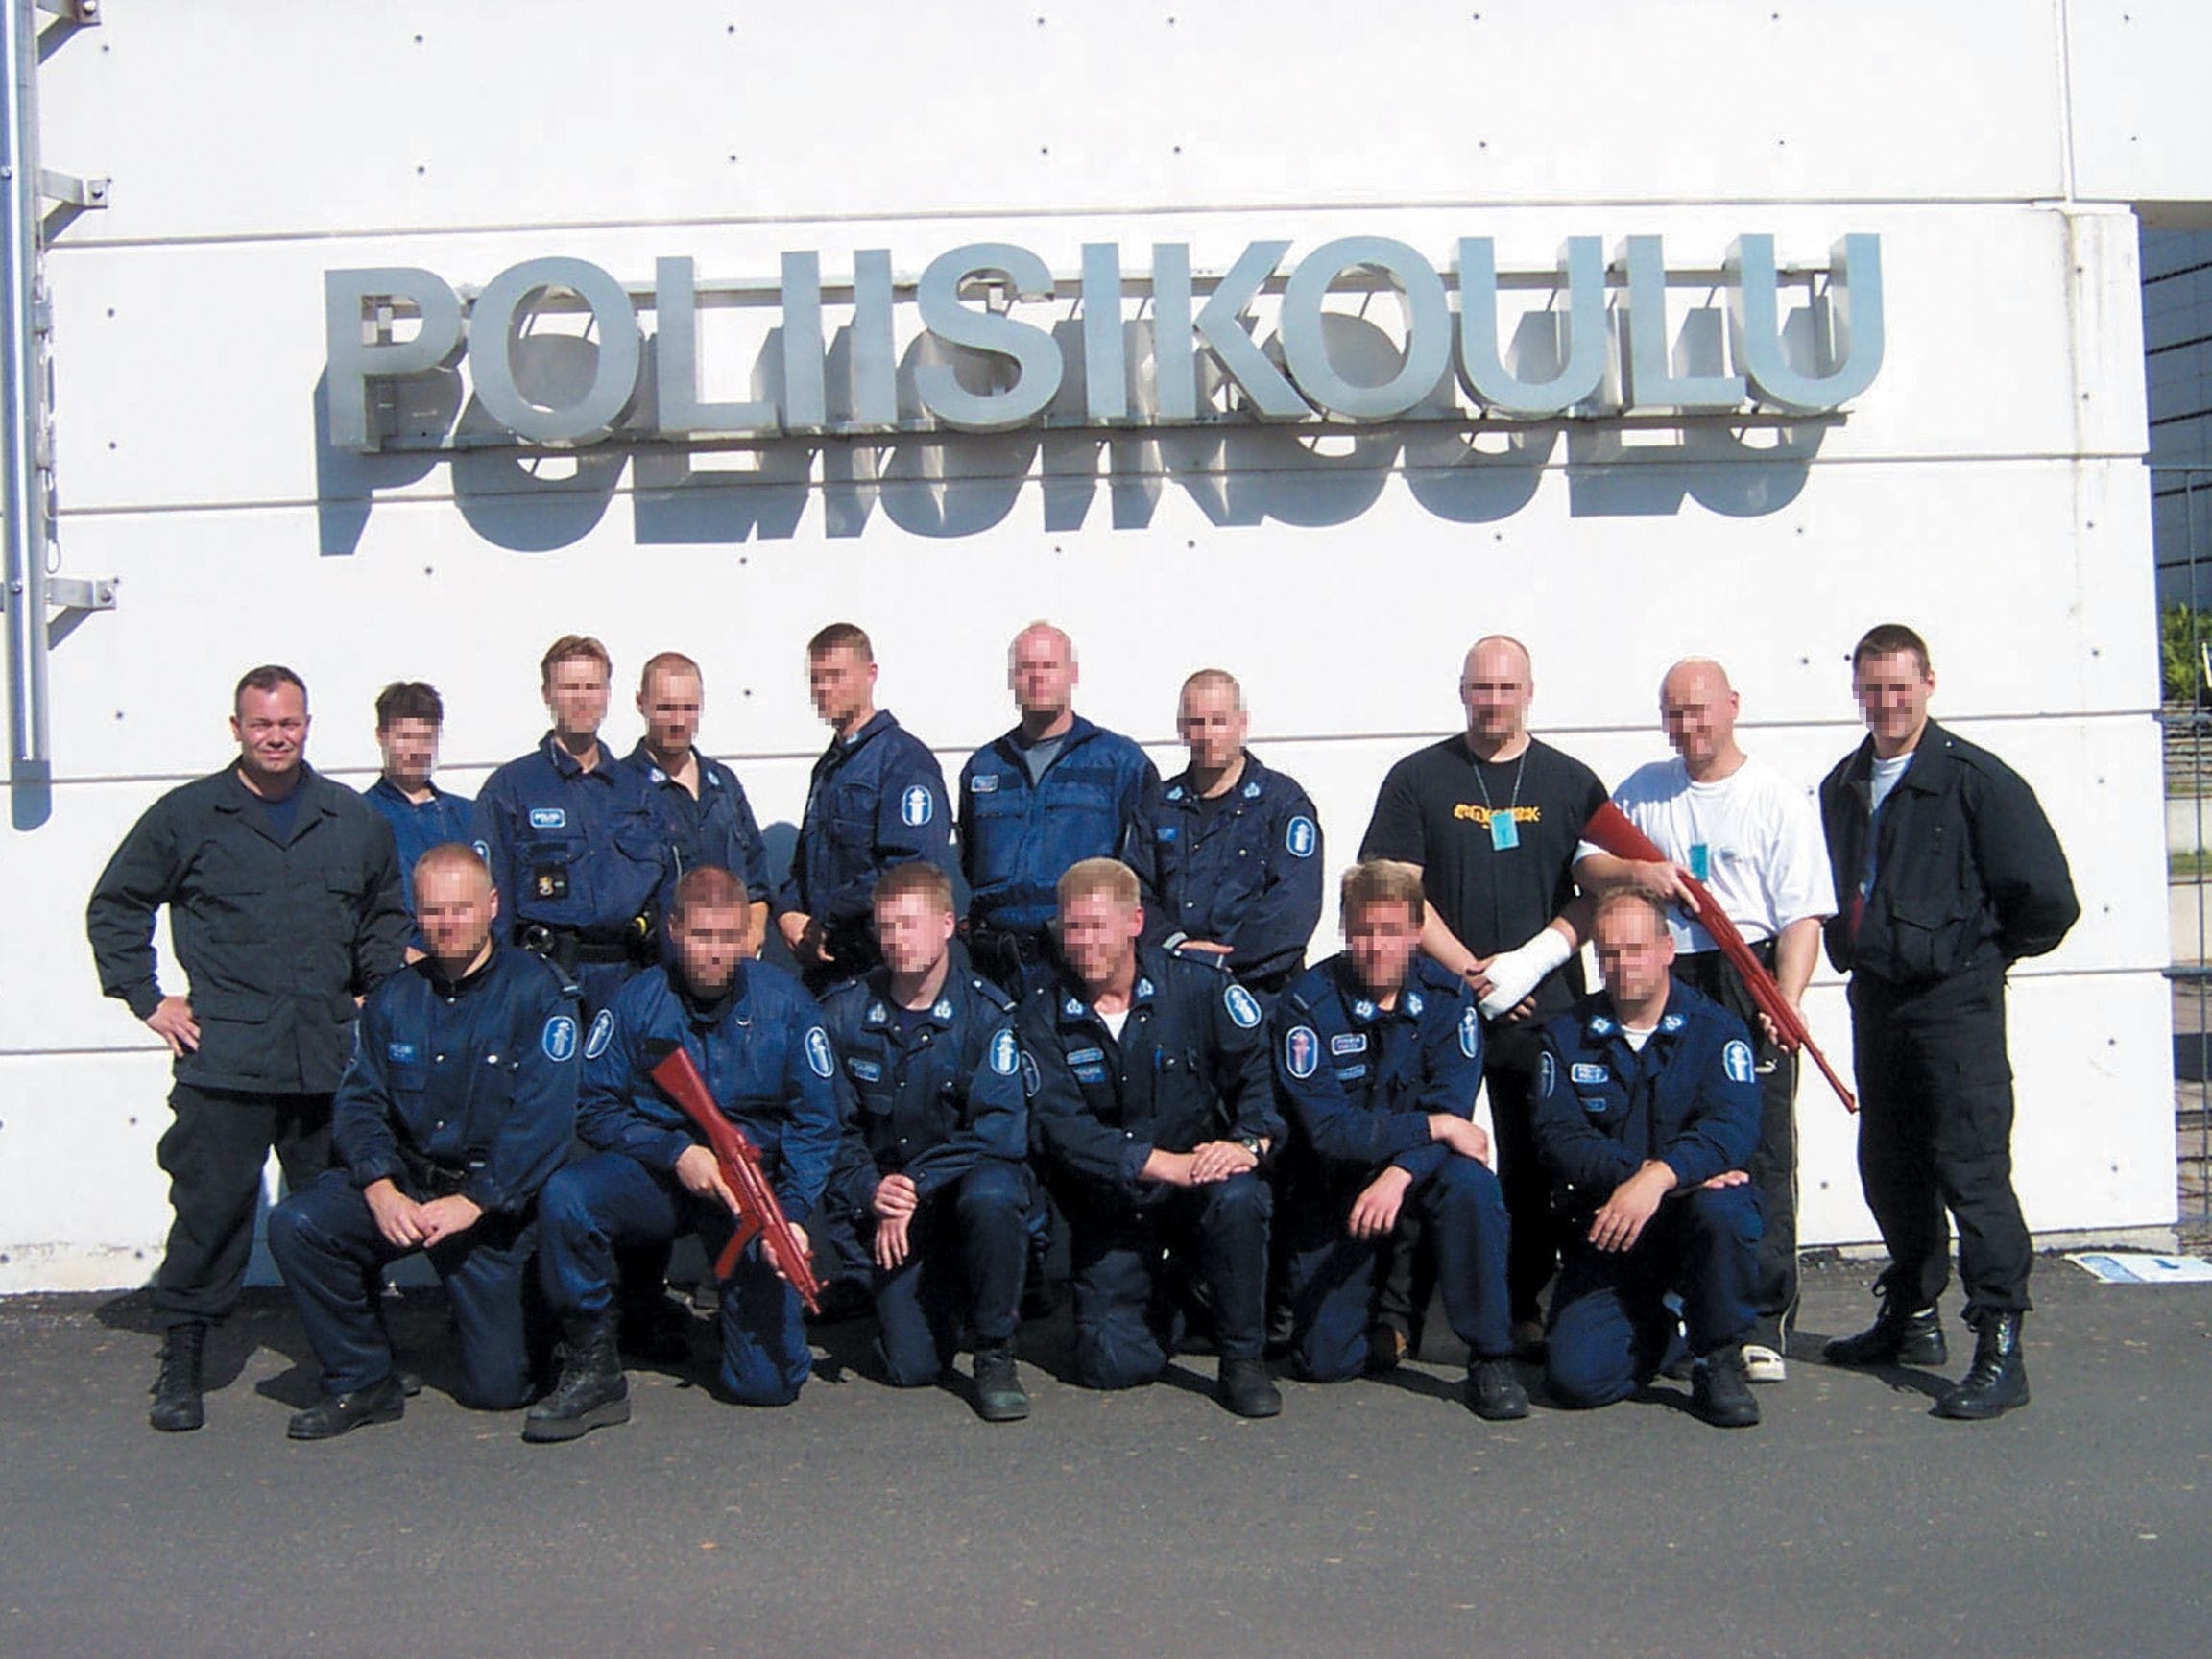 Jim (left) with his students, the instructor cadre of the Finnish National Police Academy (POLIISIKOULU) in Tampere, Finland. He taught several courses there.